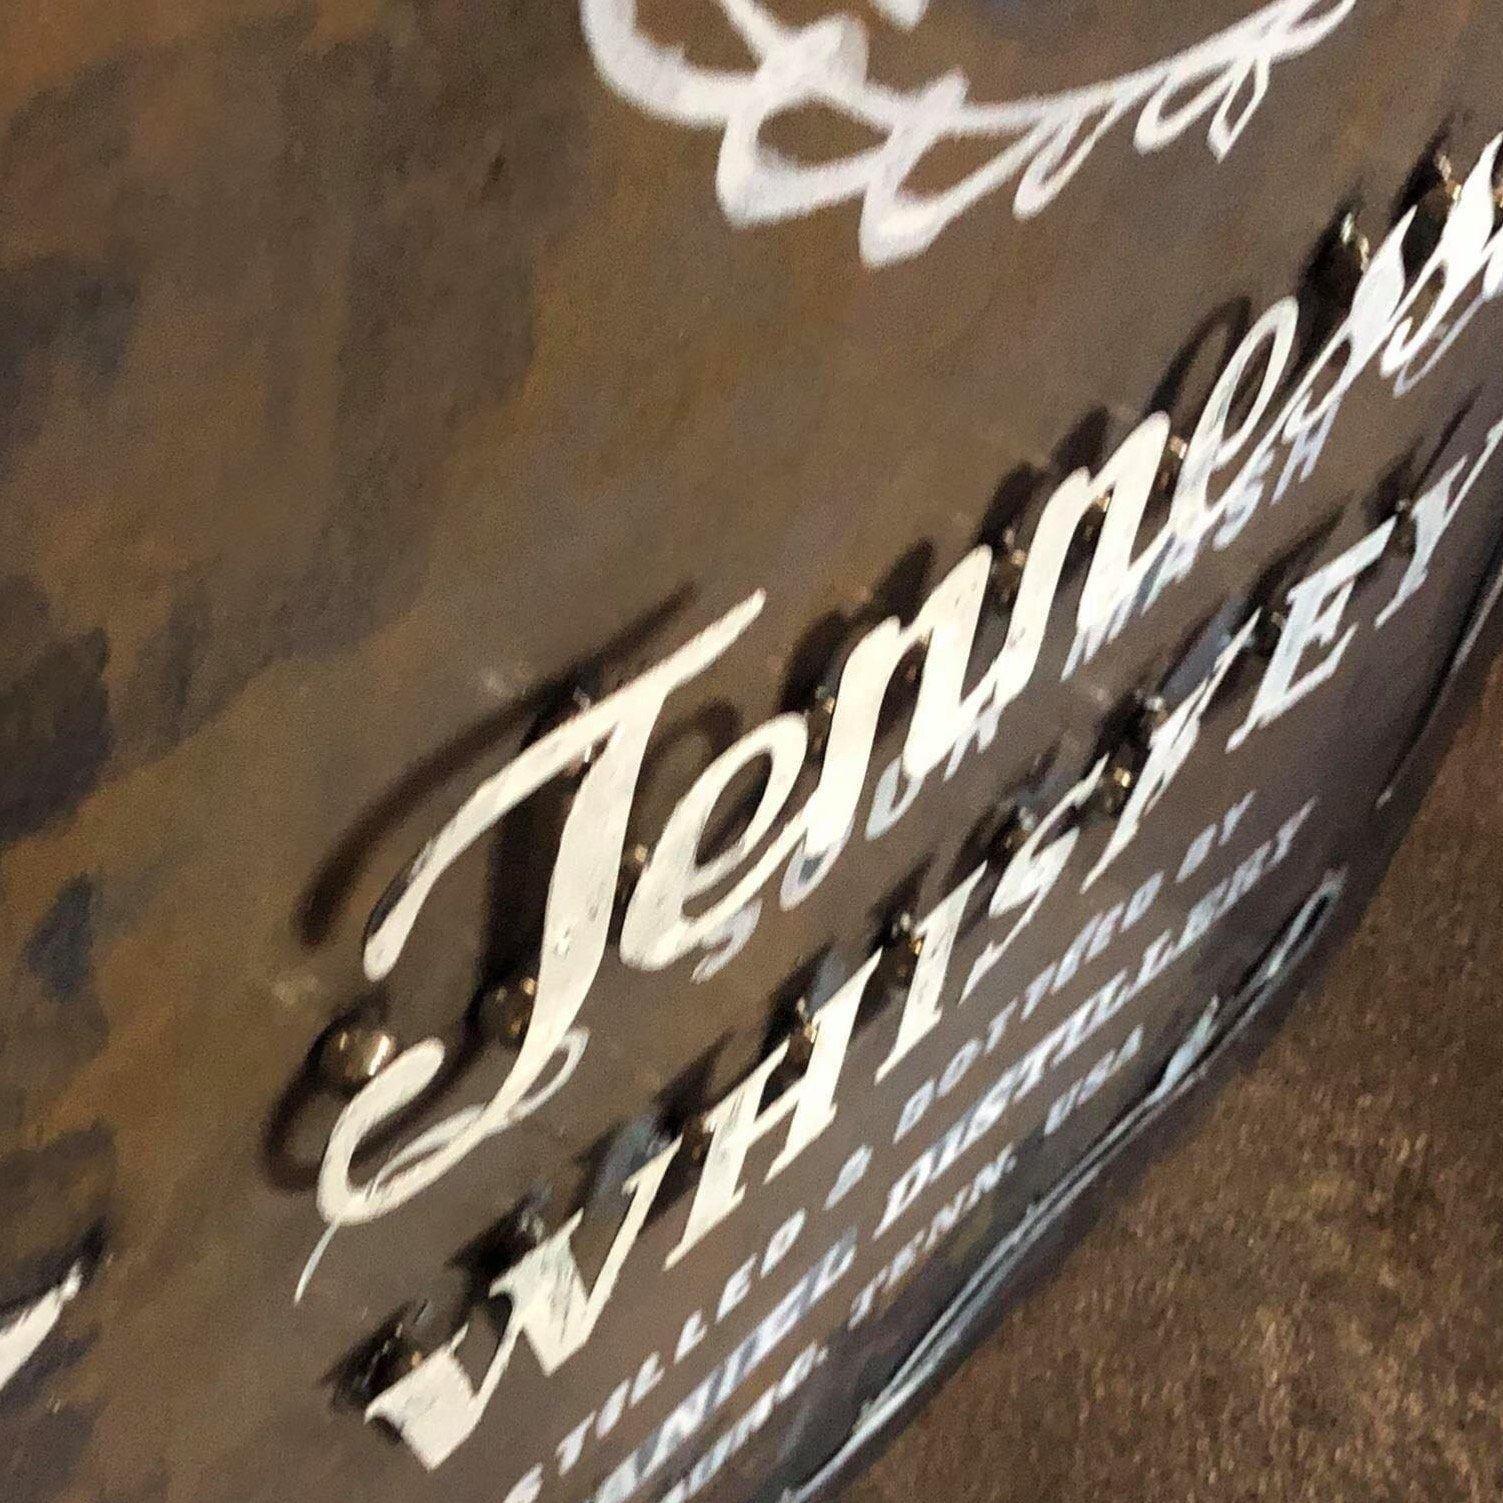 Jack Daniel’s Hand Crafted Metal Wall Art - The Whiskey Cave